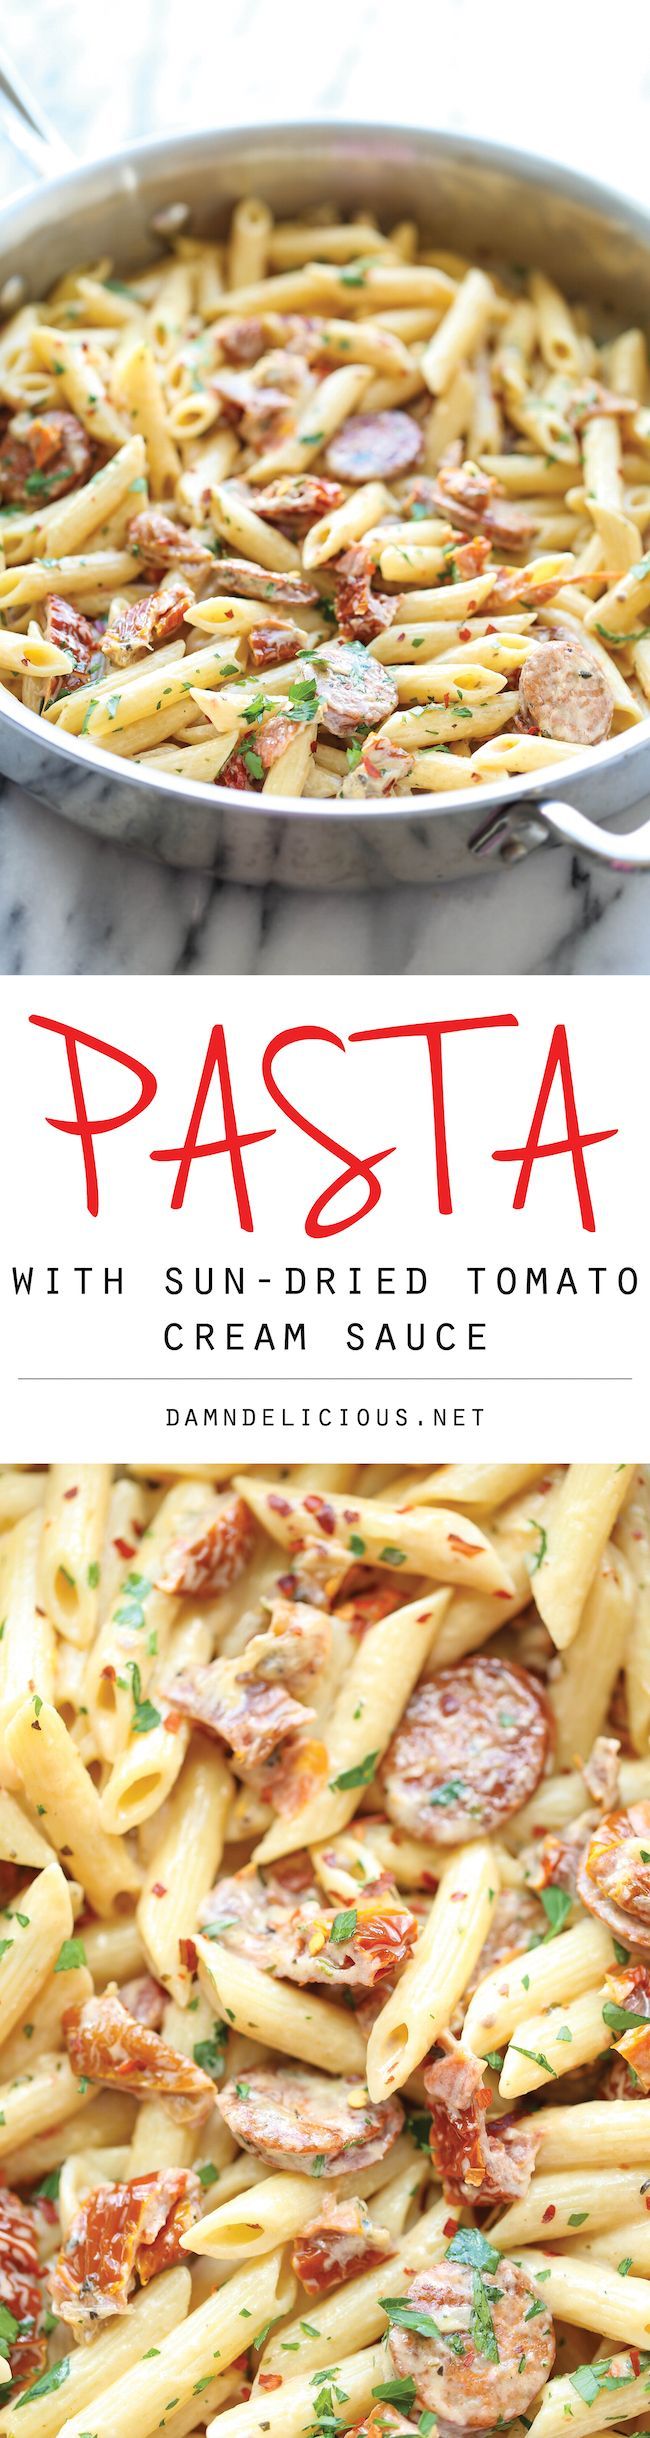 Pasta with Sun-Dried Tomato Cream Sauce – A super easy pasta dish with the most amazing, creamiest sun-dried tomato sauce ever,